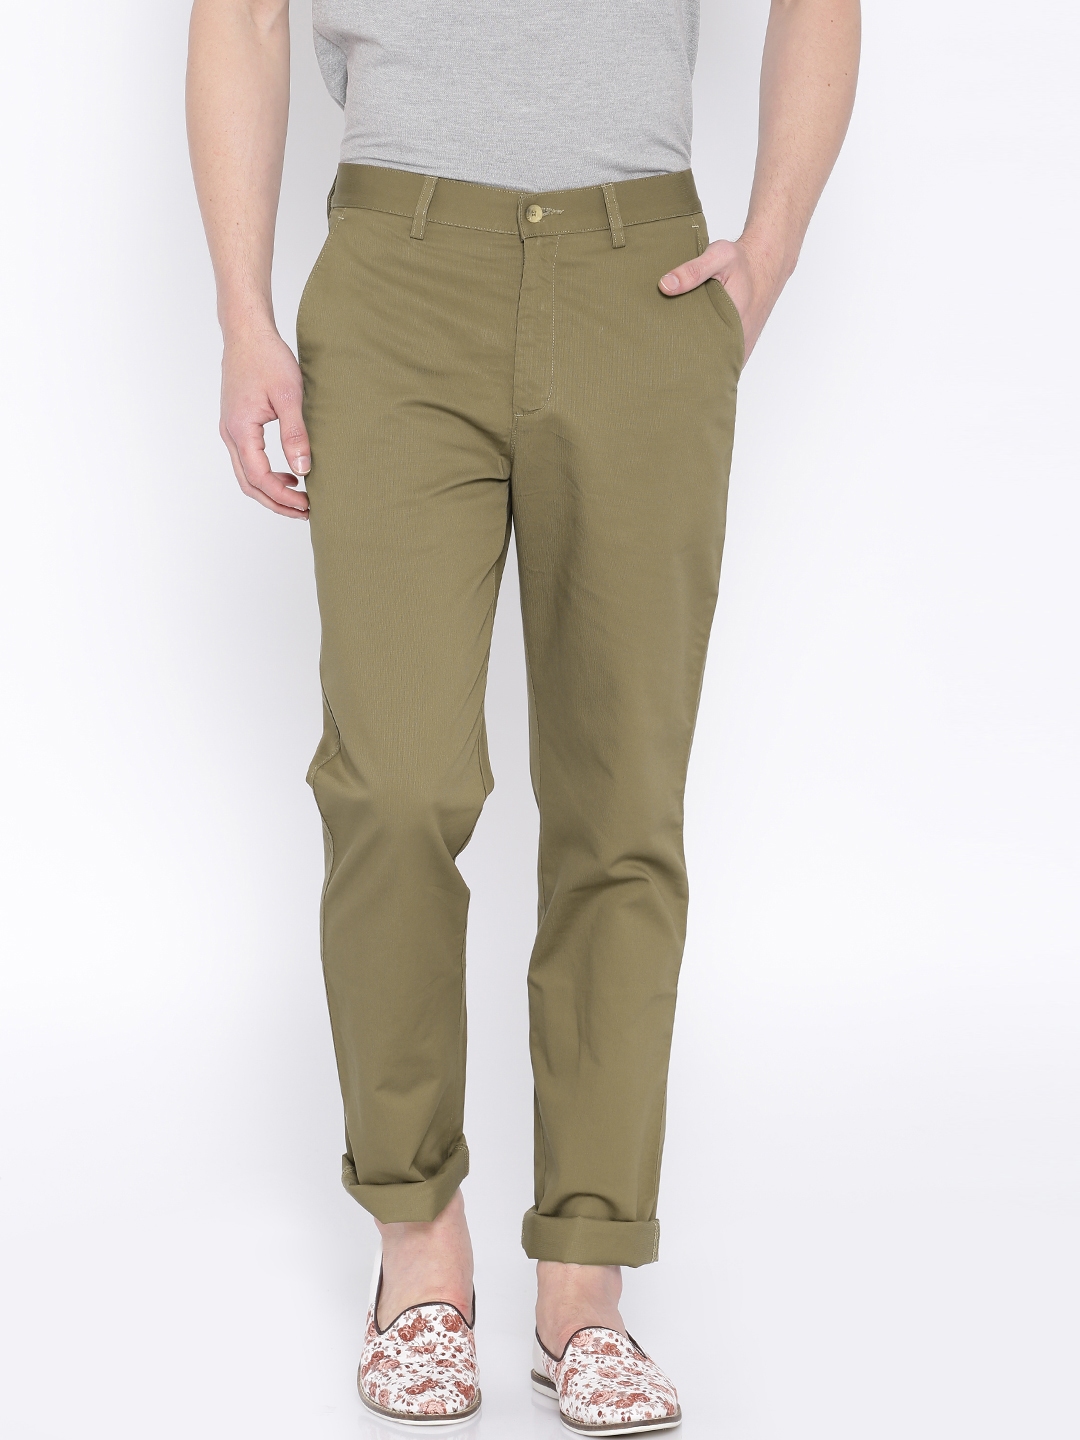 Buy Peter England Khaki Slim Fit Chino Trousers - Trousers for Men ...